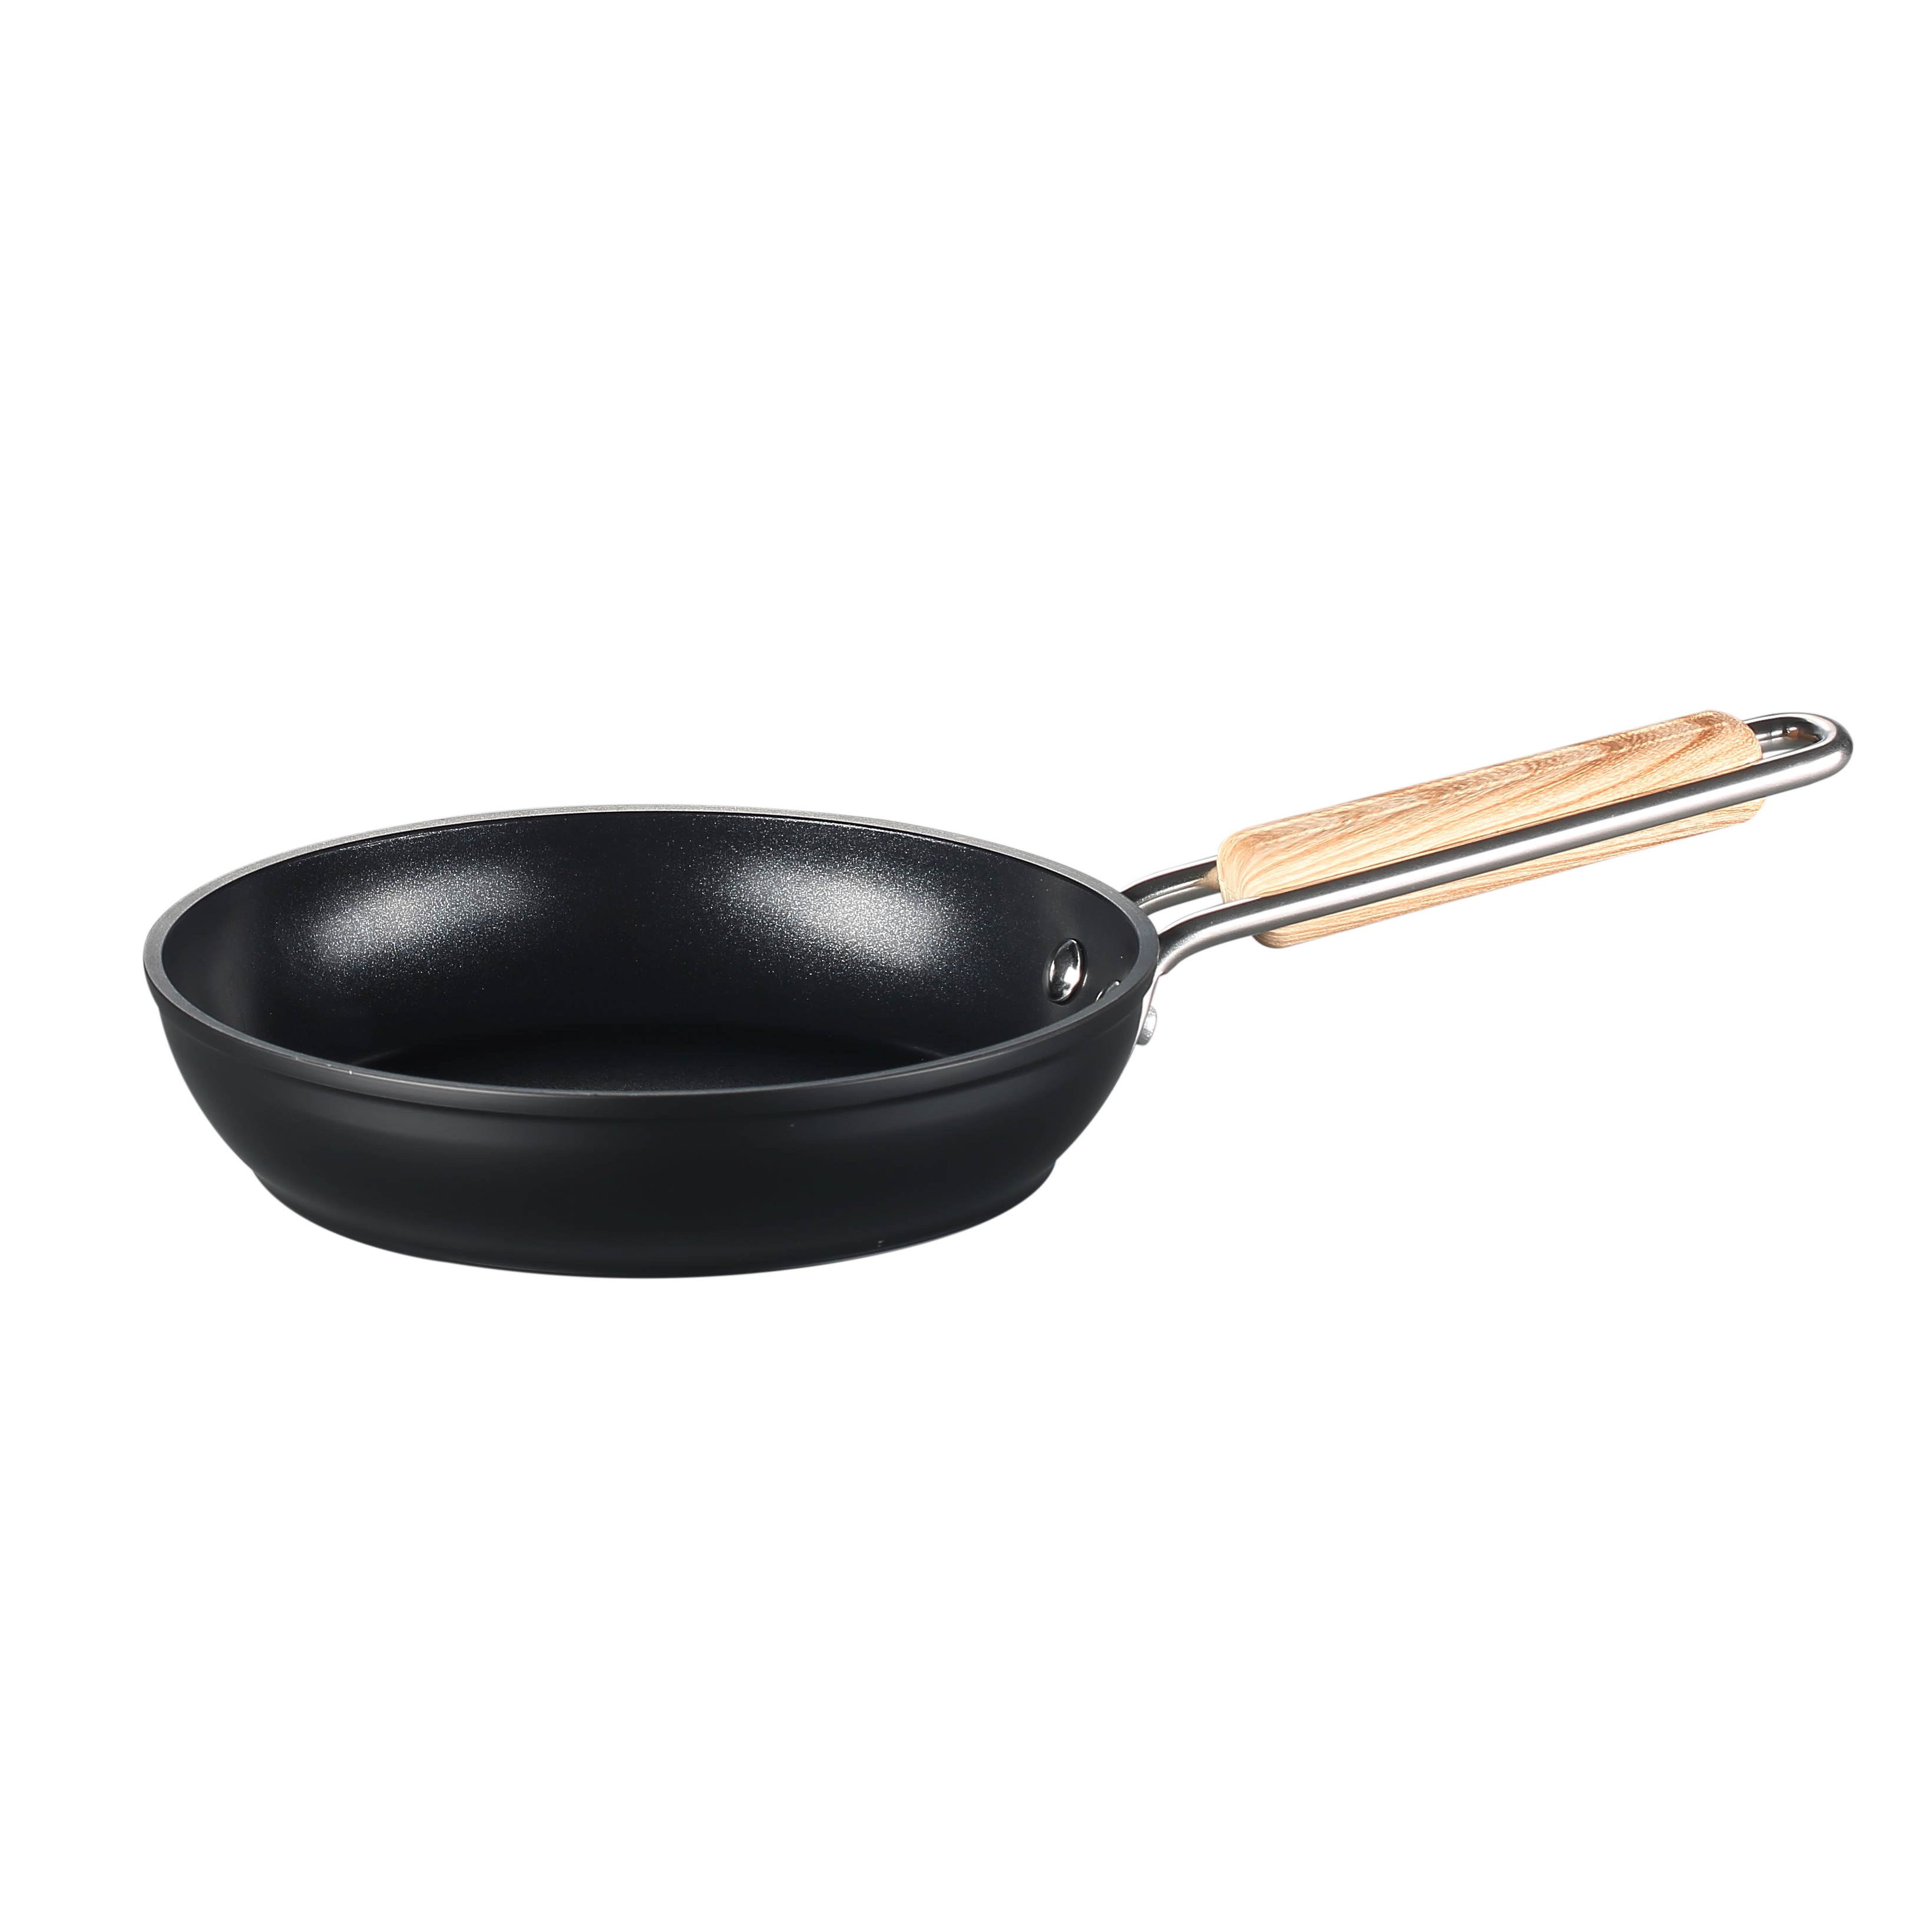 Nordic Range Non-stick Cookware Aluminum Forged Frypan